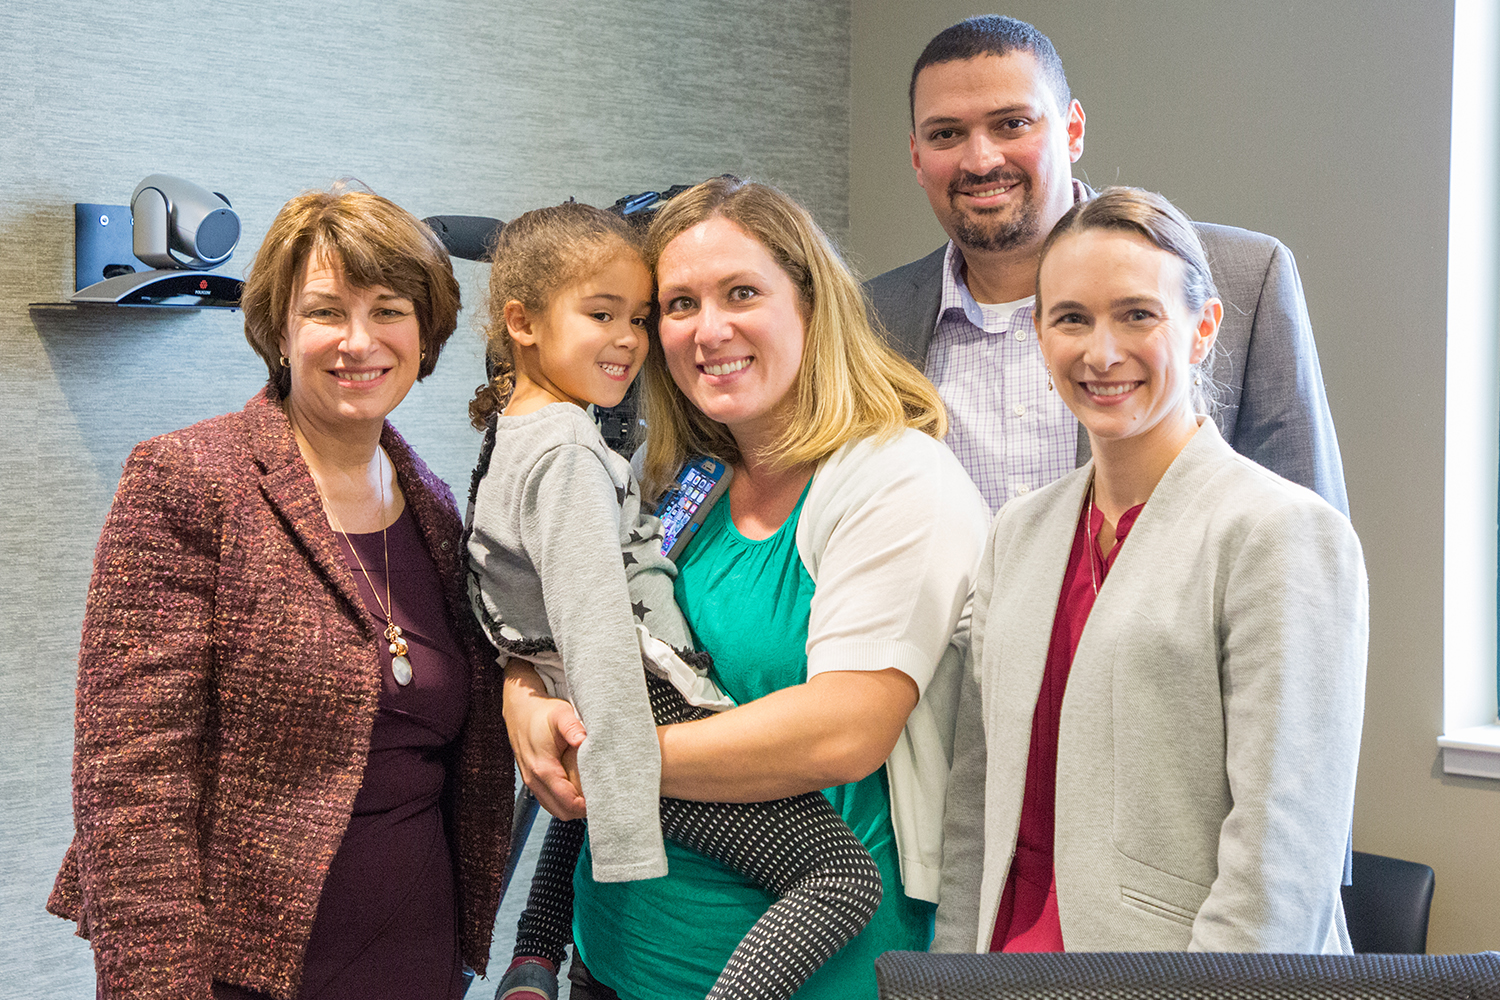 Senator Klobuchar poses with Dr. Angela Sinner and the parents of Sophia Ayouche